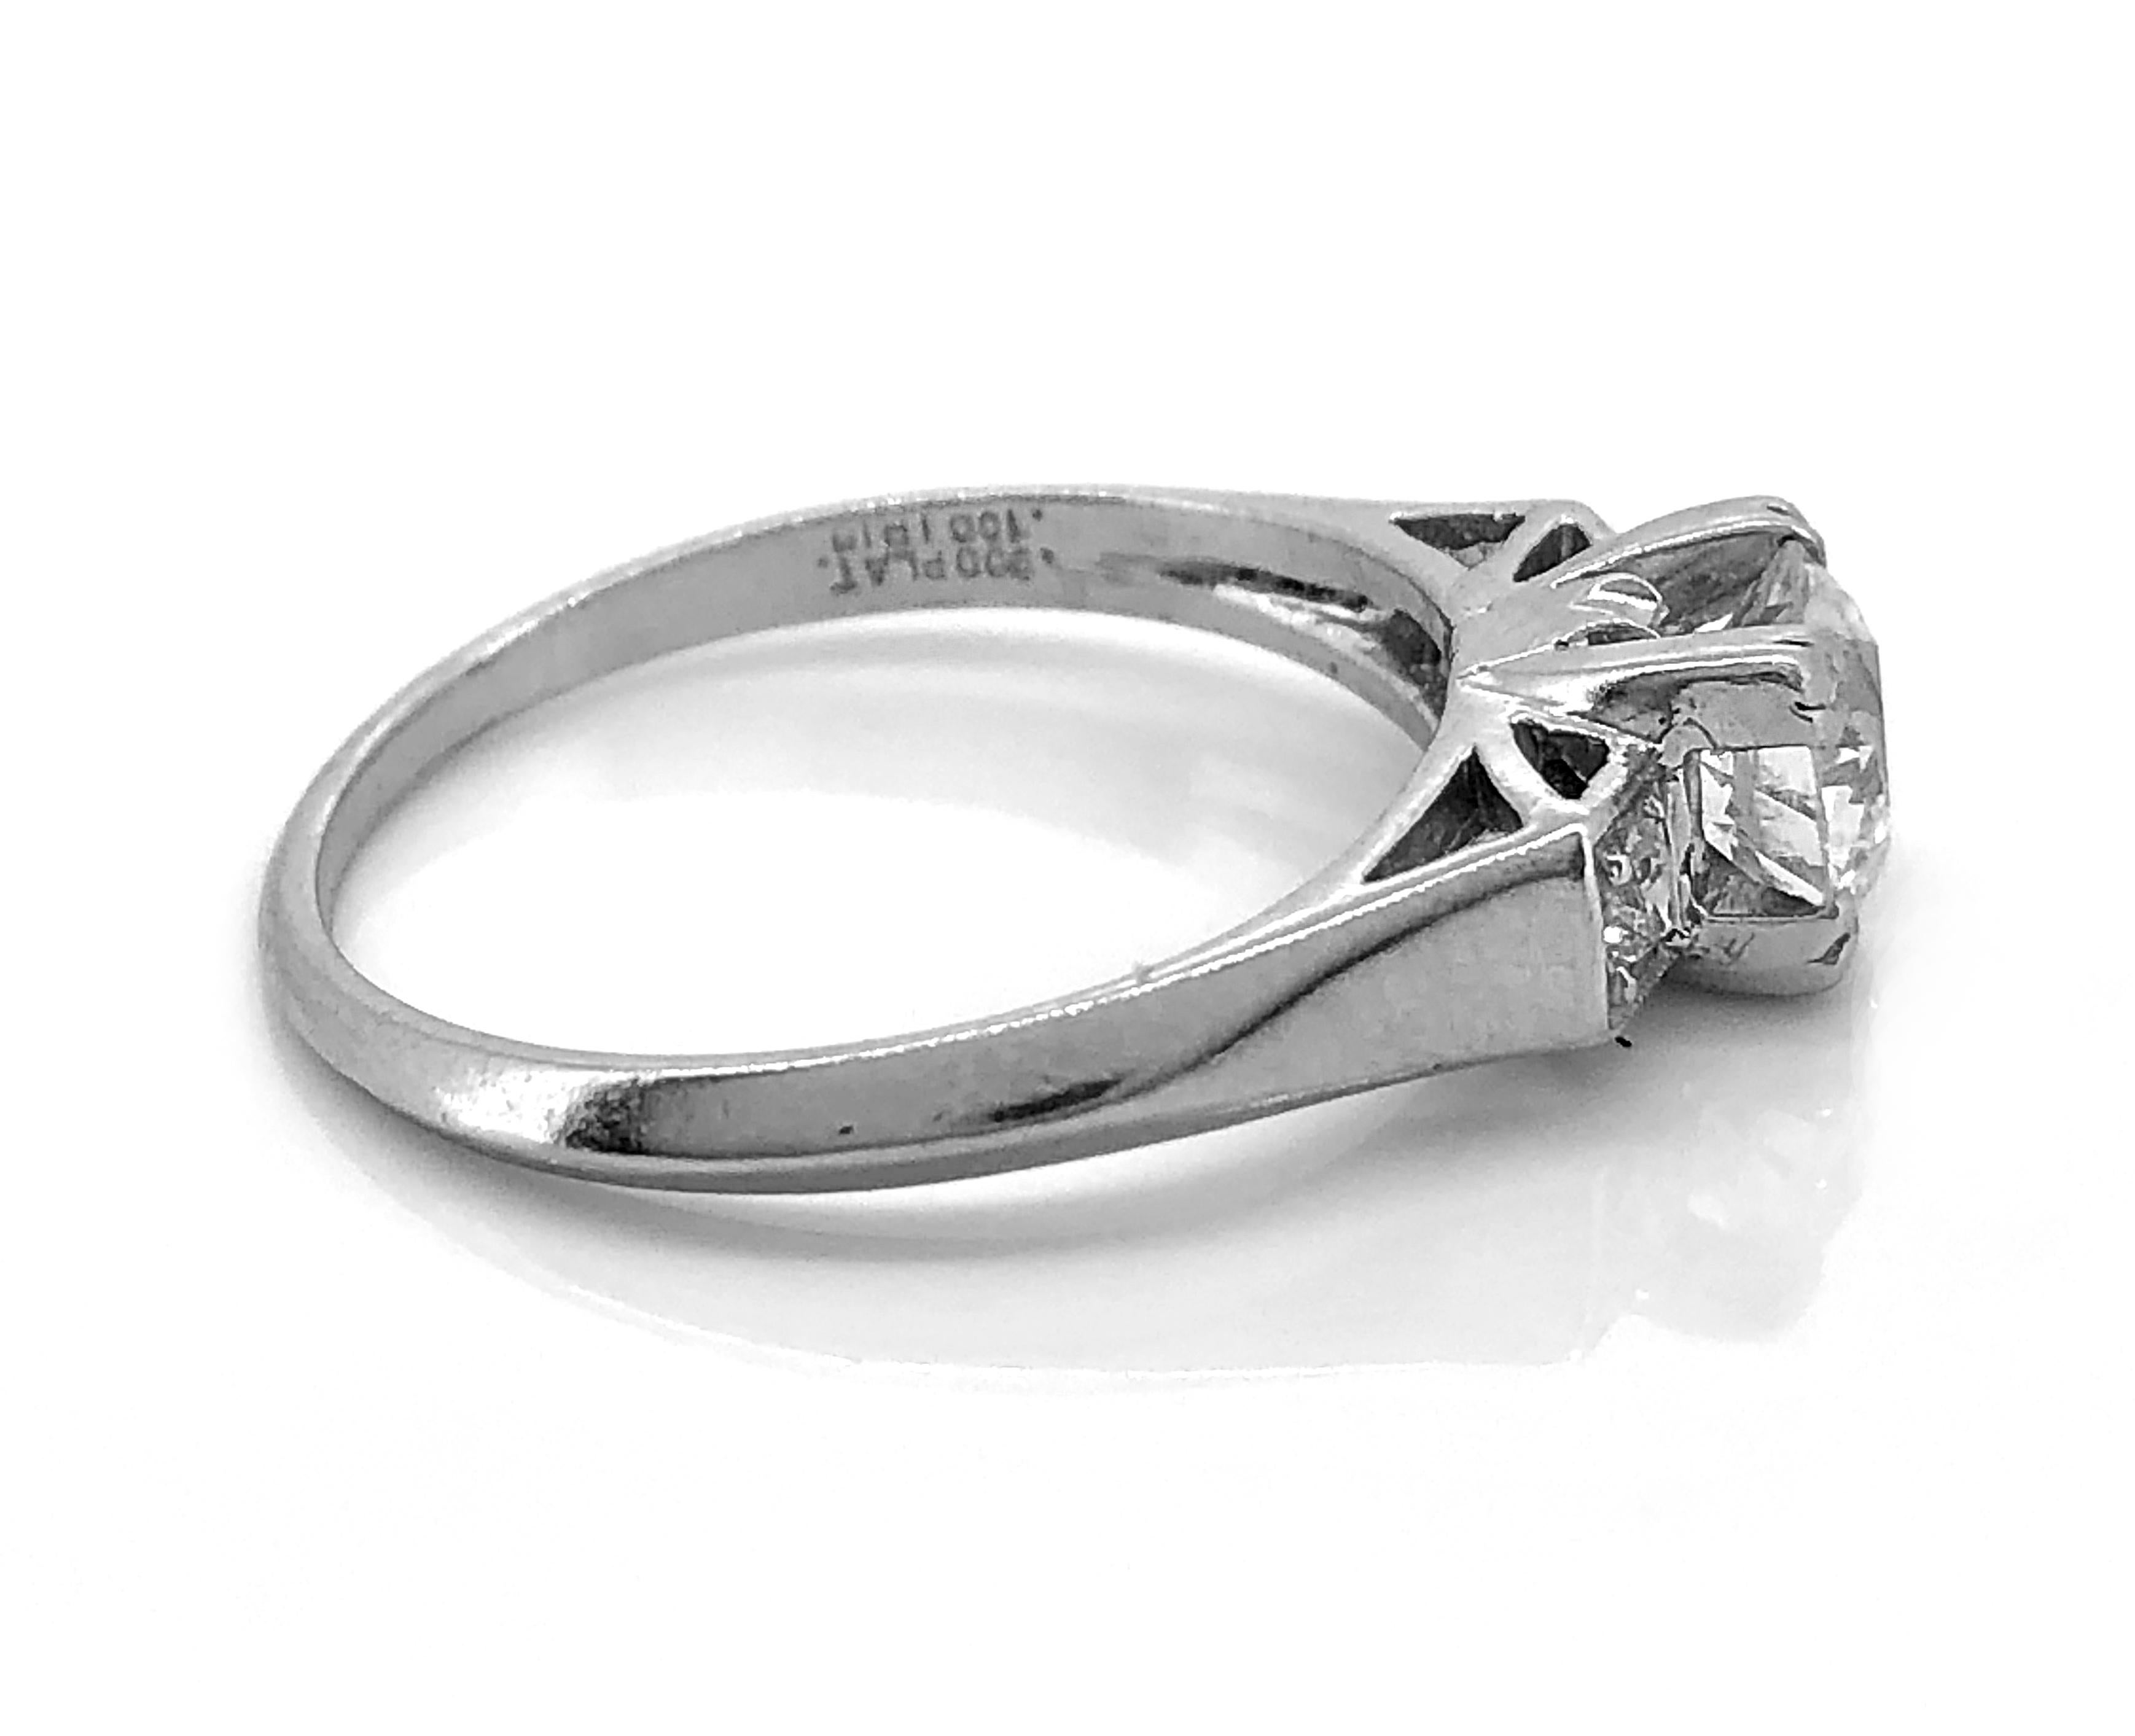 An Art Deco platinum & diamond antique engagement ring featuring a .75ct. apx. diamond with fish tail prongs and accenting diamonds weighing .15ct. apx. T.W. The antique engagement ring is very geometric in design. It has a very bold look!

Primary